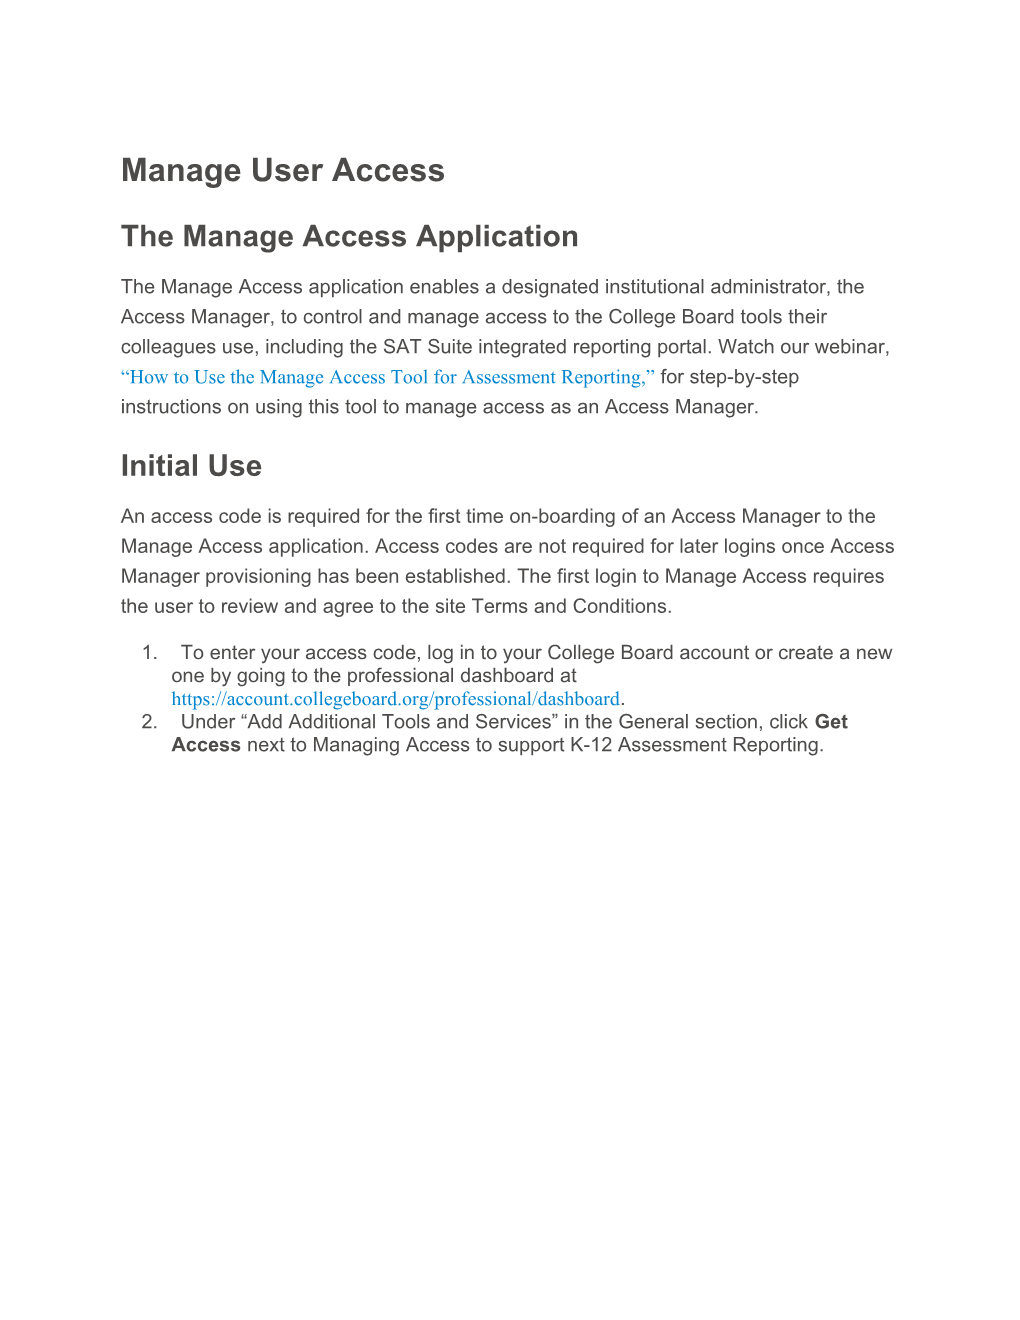 The Manage Access Application